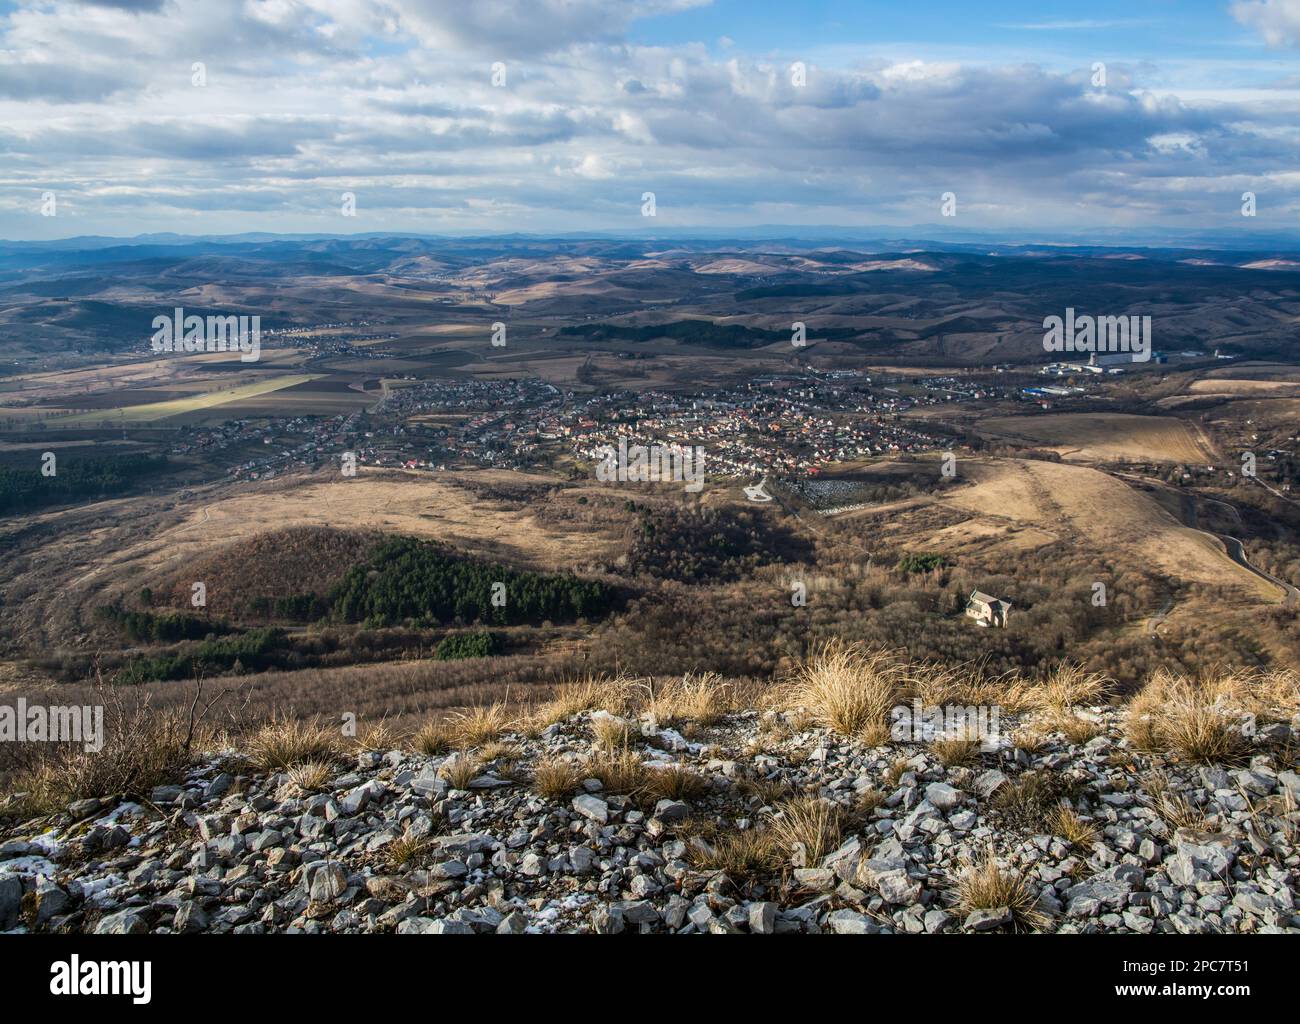 View from the top of the rocky mountain. Hungary, Bélapátfalva Stock Photo